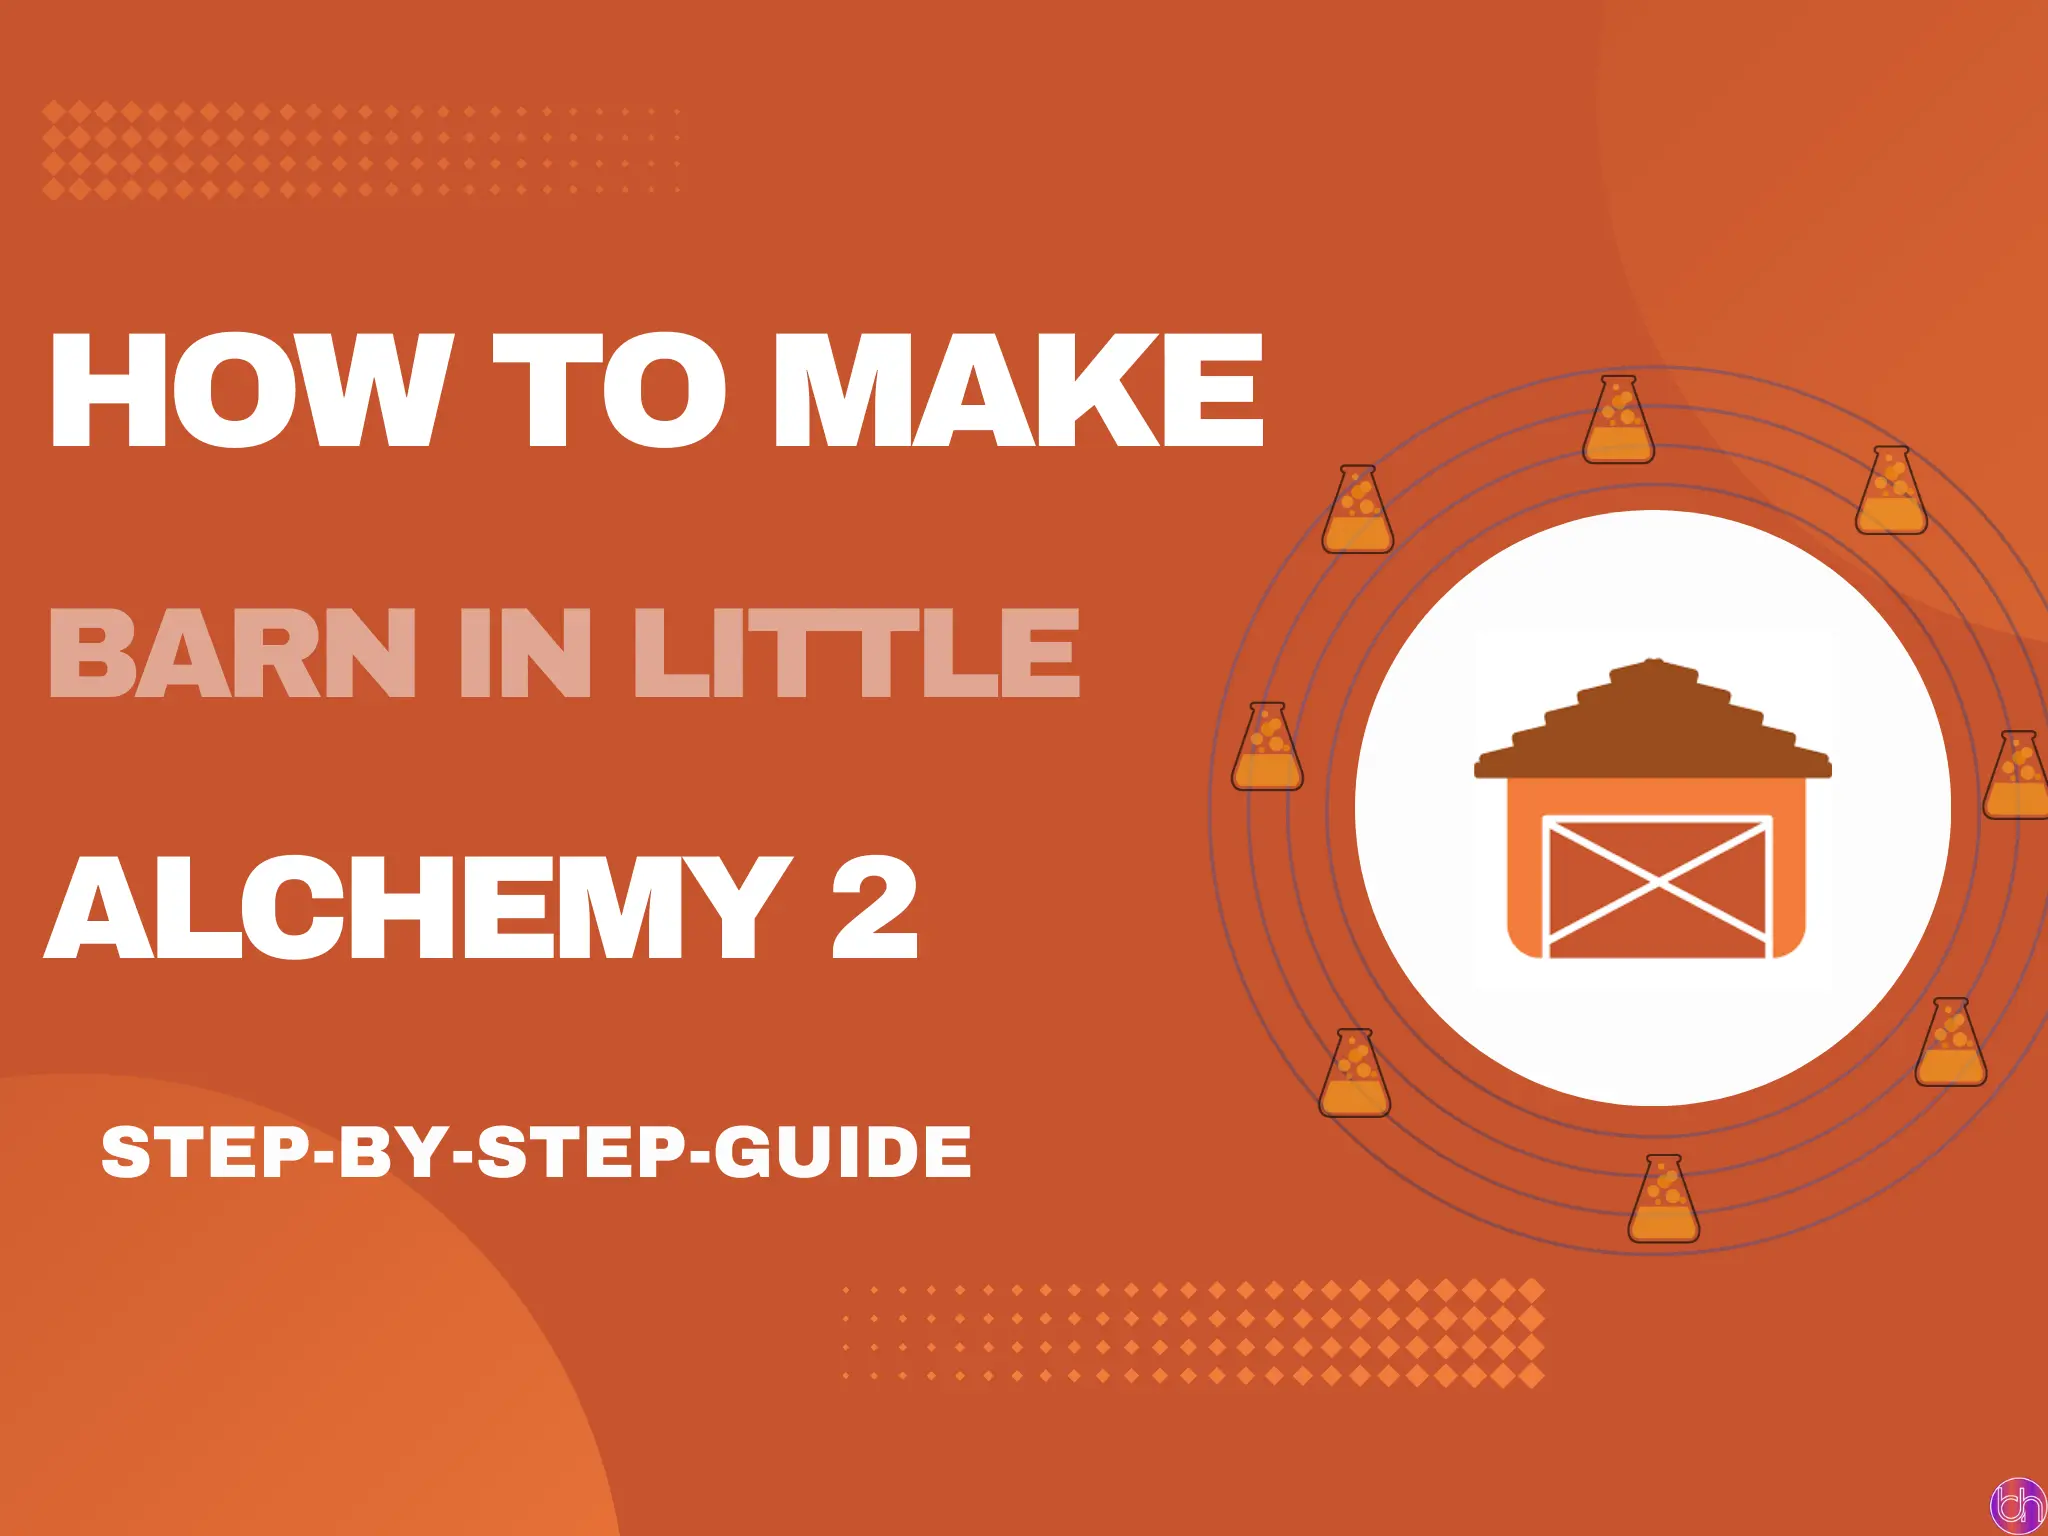 How to make Barn in little alchemy 2